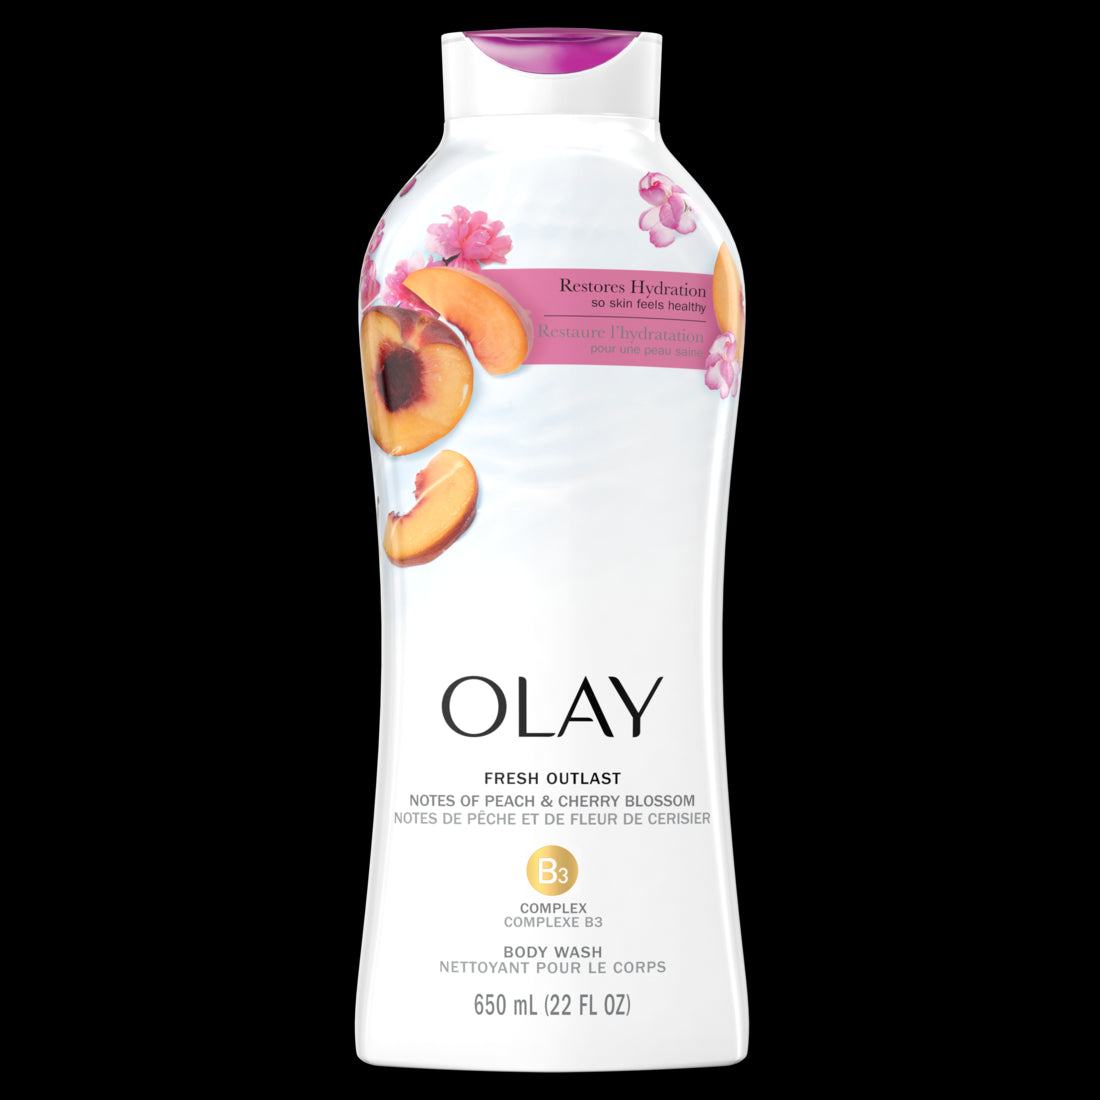 Olay Fresh Outlast Paraben Free Body Wash with Energizing Notes of Peach and Cherry Blossom - 22oz/4pk